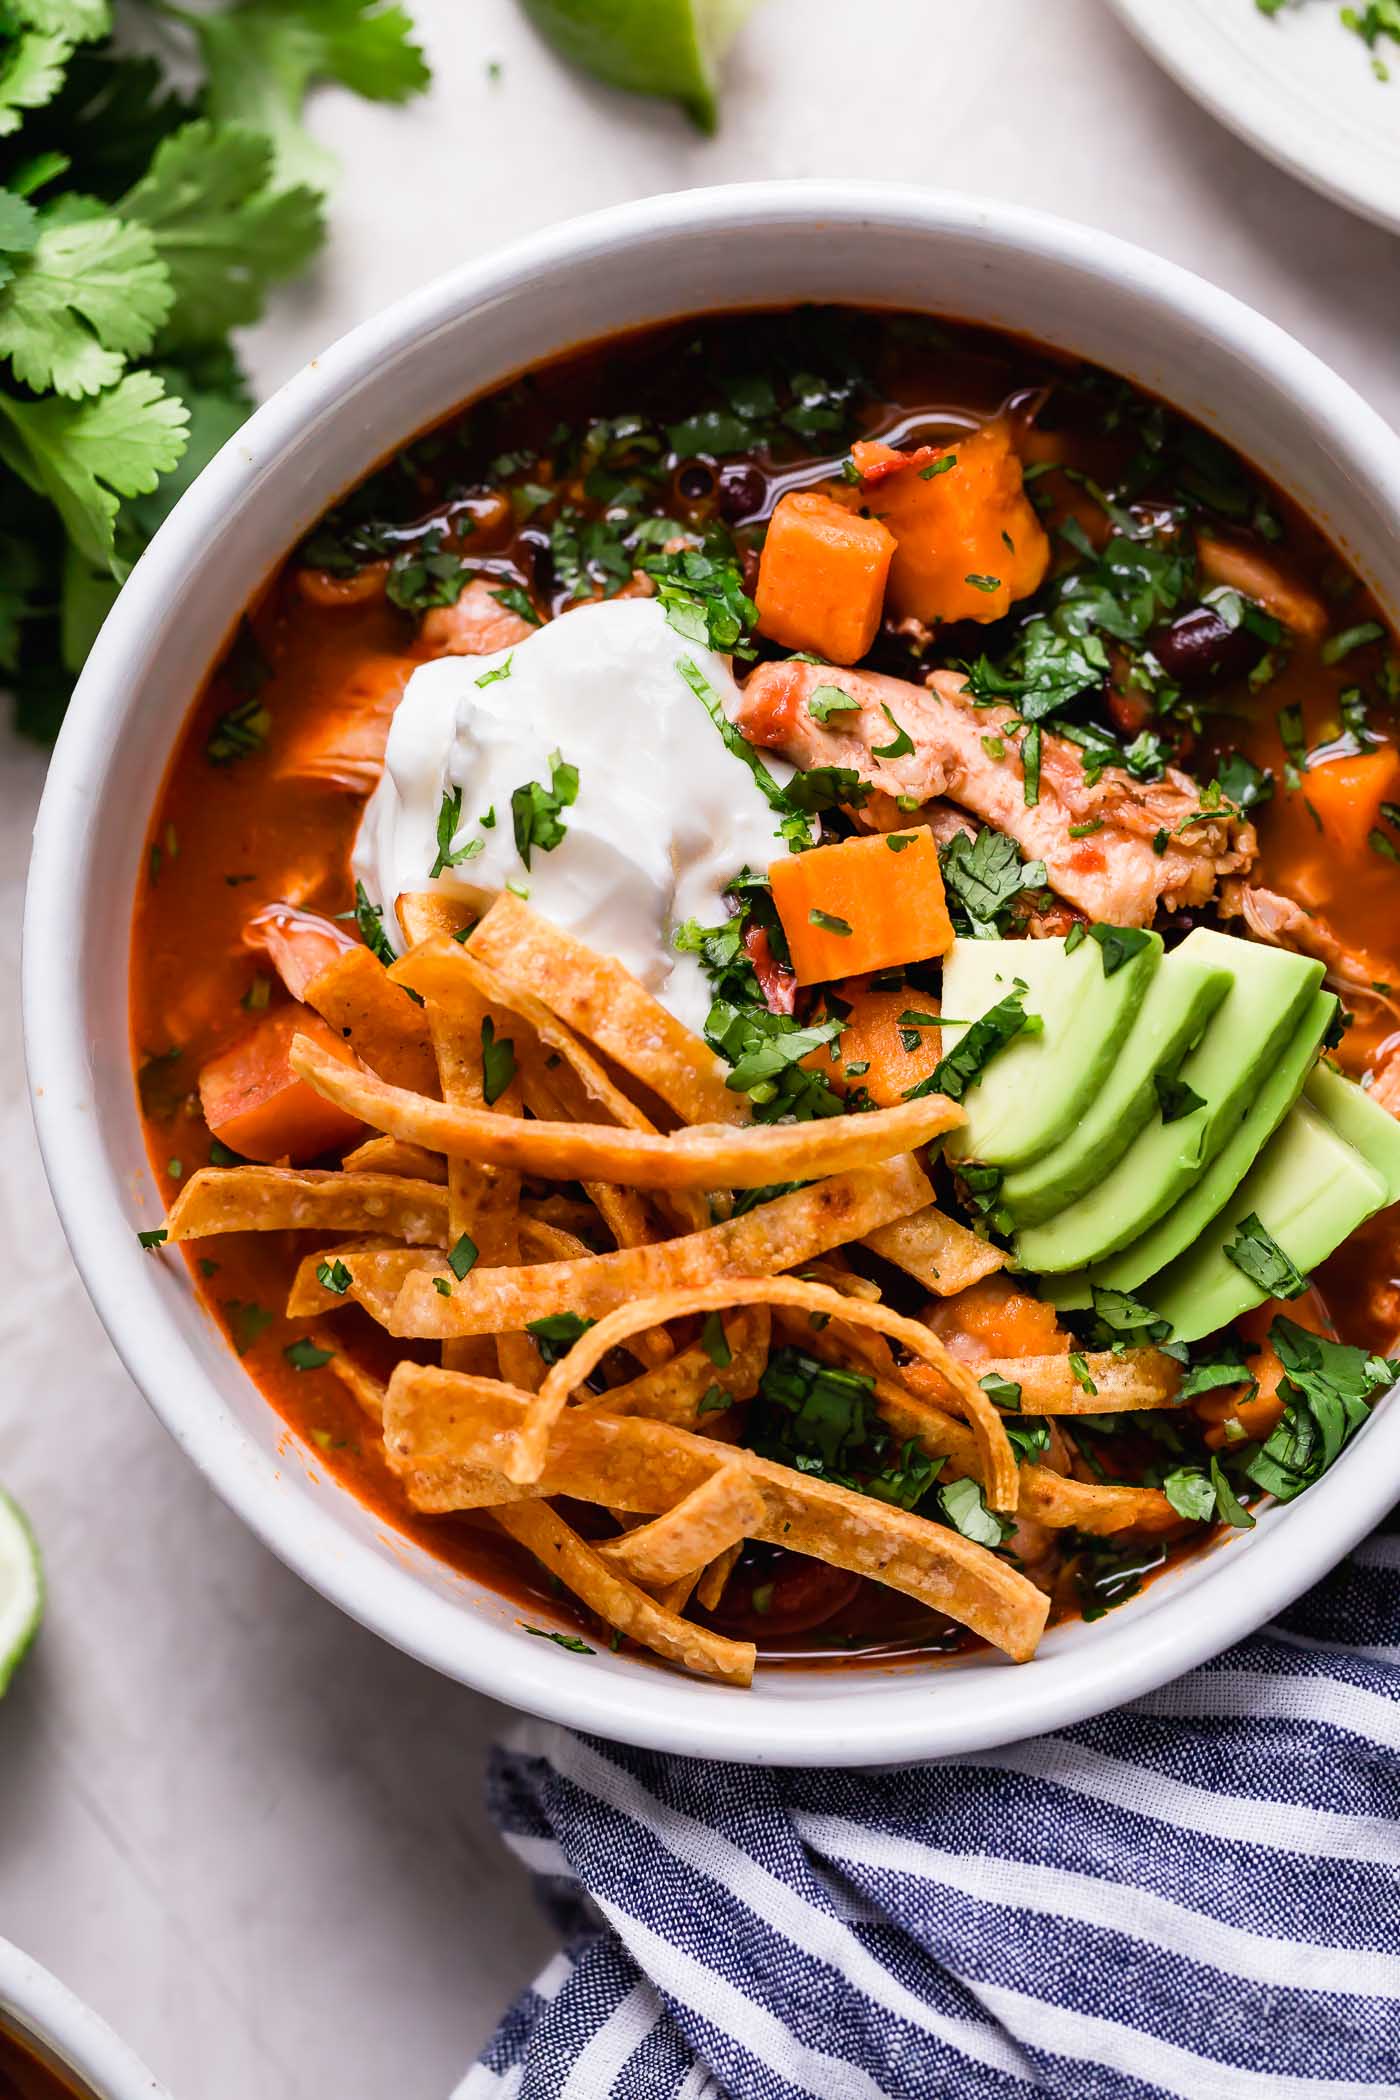 a super flavorful & super easy chicken tortilla soup recipe. this tortilla soup is made extra flavorful thanks to juicy chicken thighs, tender sweet potatoes, & your favorite light beer. made in 35 minutes or less on the stovetop, chicken tortilla soup is the perfect comforting weeknight dinner for any chilly night this fall or winter! #playswellwithbutter #chickentortillasoup #easychickentortillasoup #stovetopchickentortillasoup #mexicanfoodrecipes #mexicanrecipes #mexicansoup #soup #souprecipe